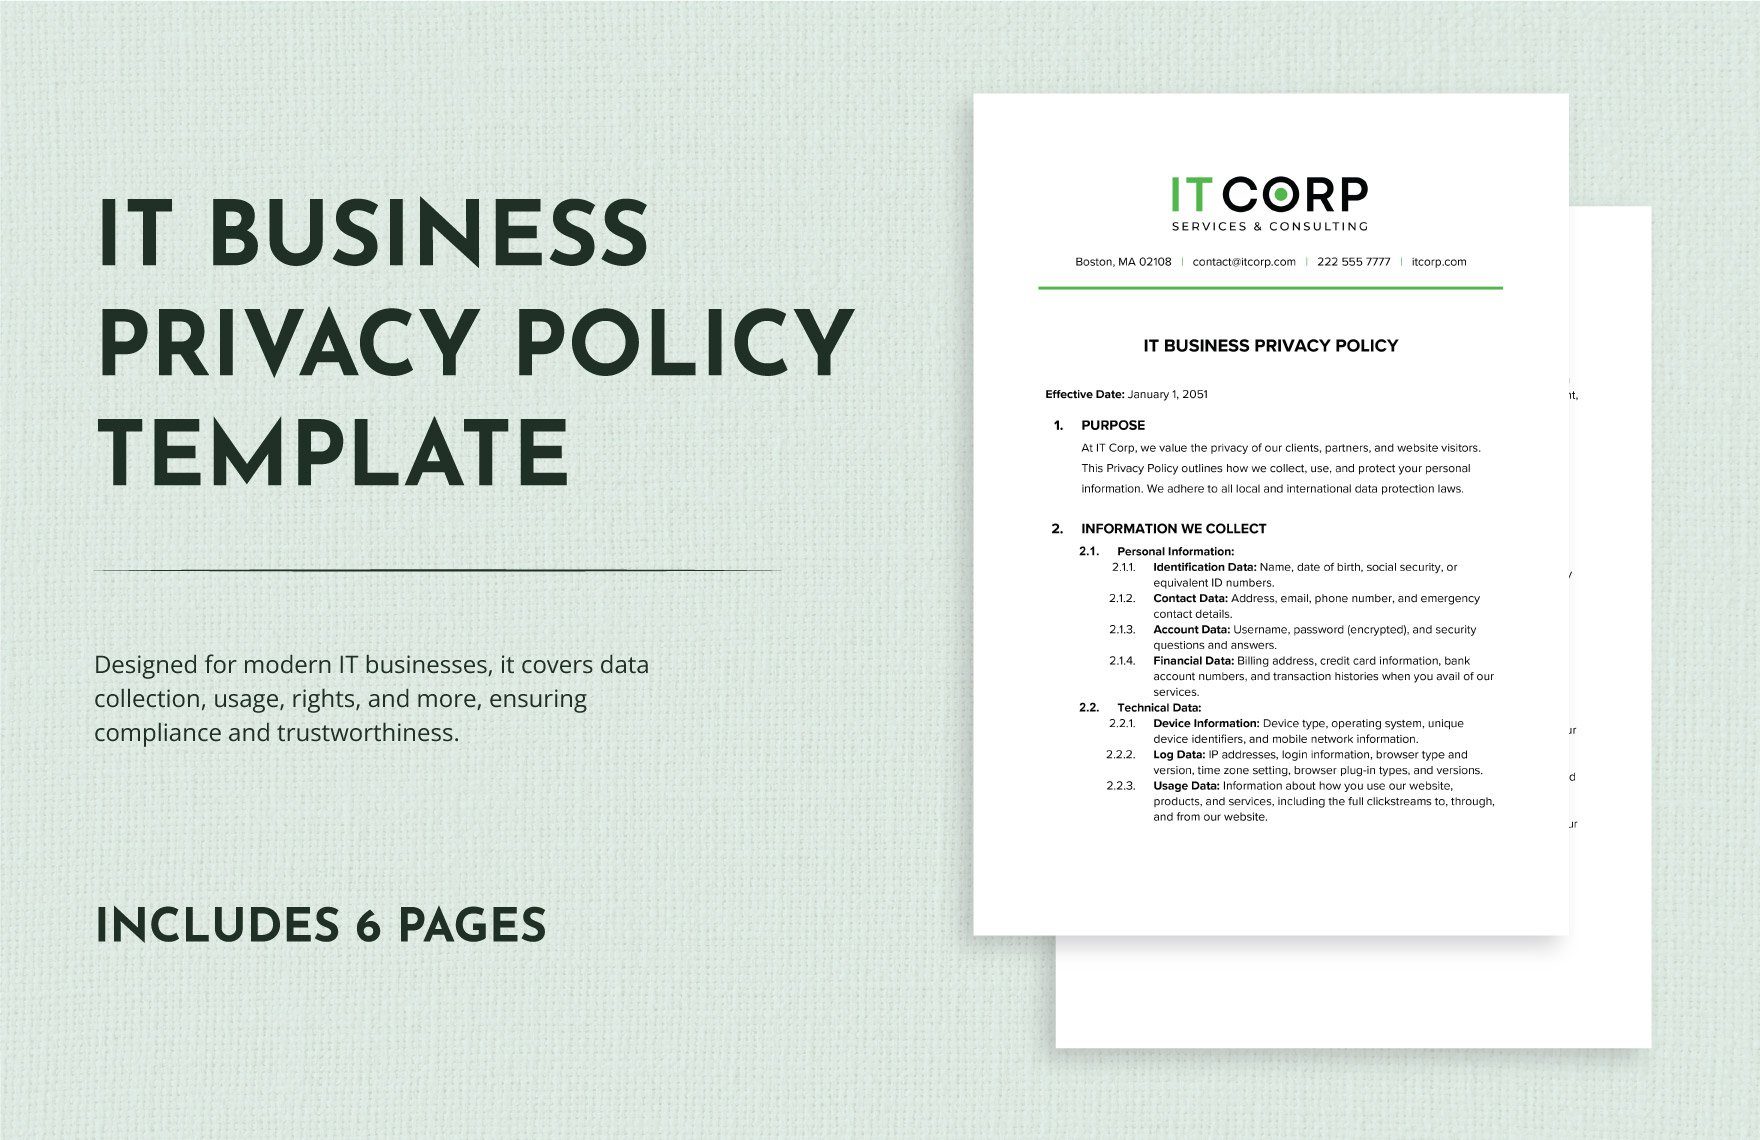 IT Business Privacy Policy Template